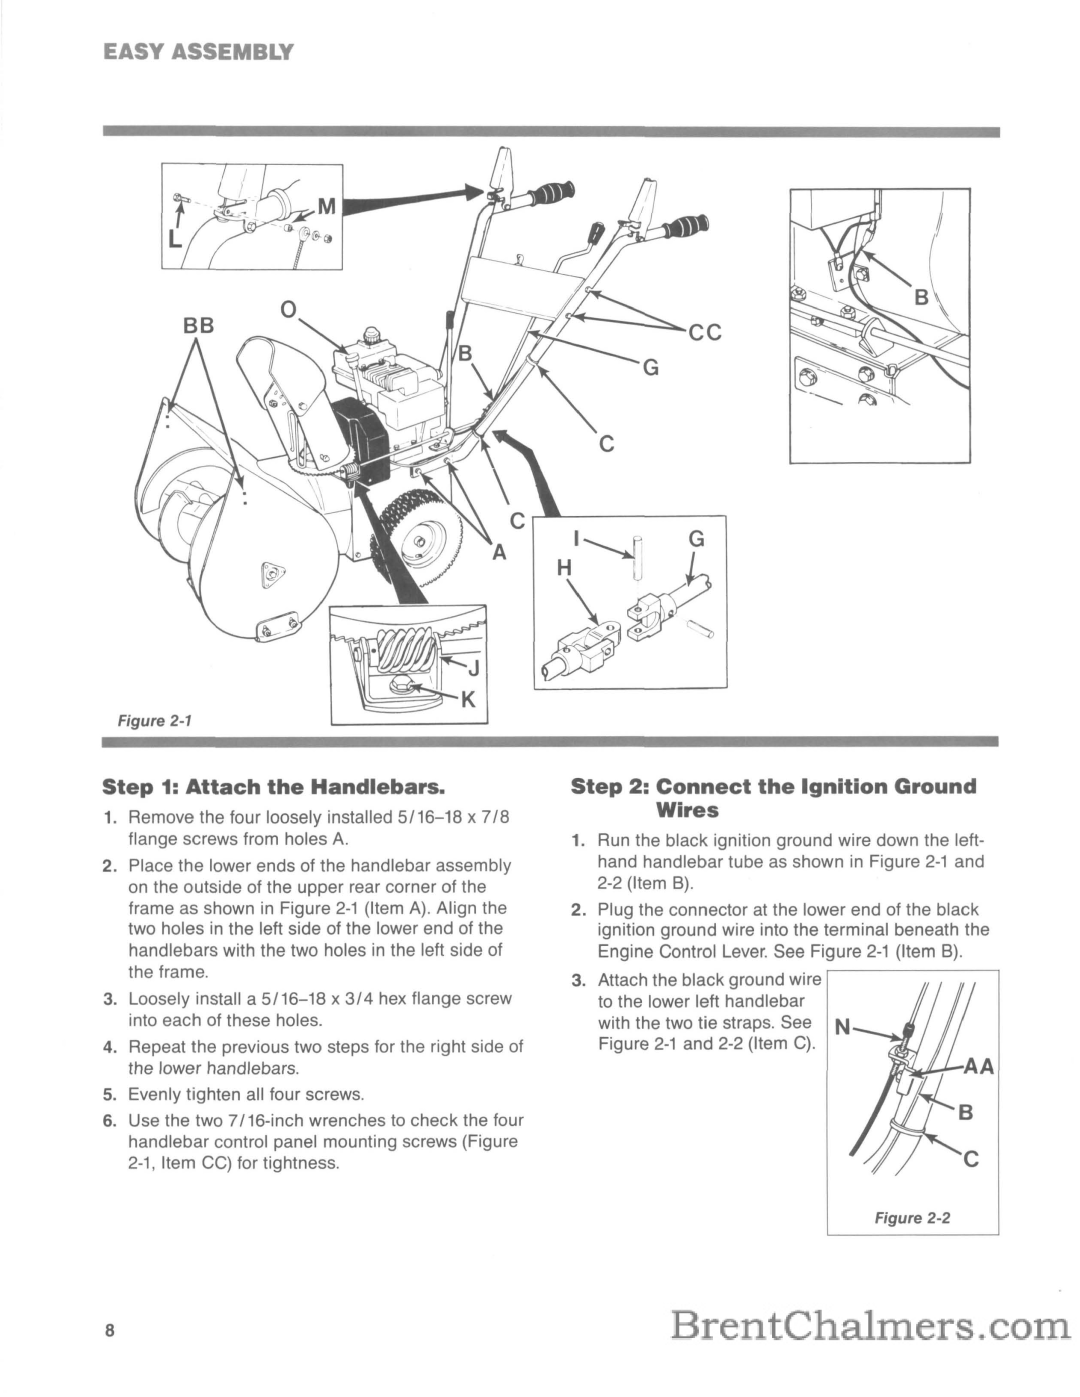 Troy-Bilt 5210R manual Easy Assembly, Attach the Handlebars, Connect the Ignition Ground Wires 